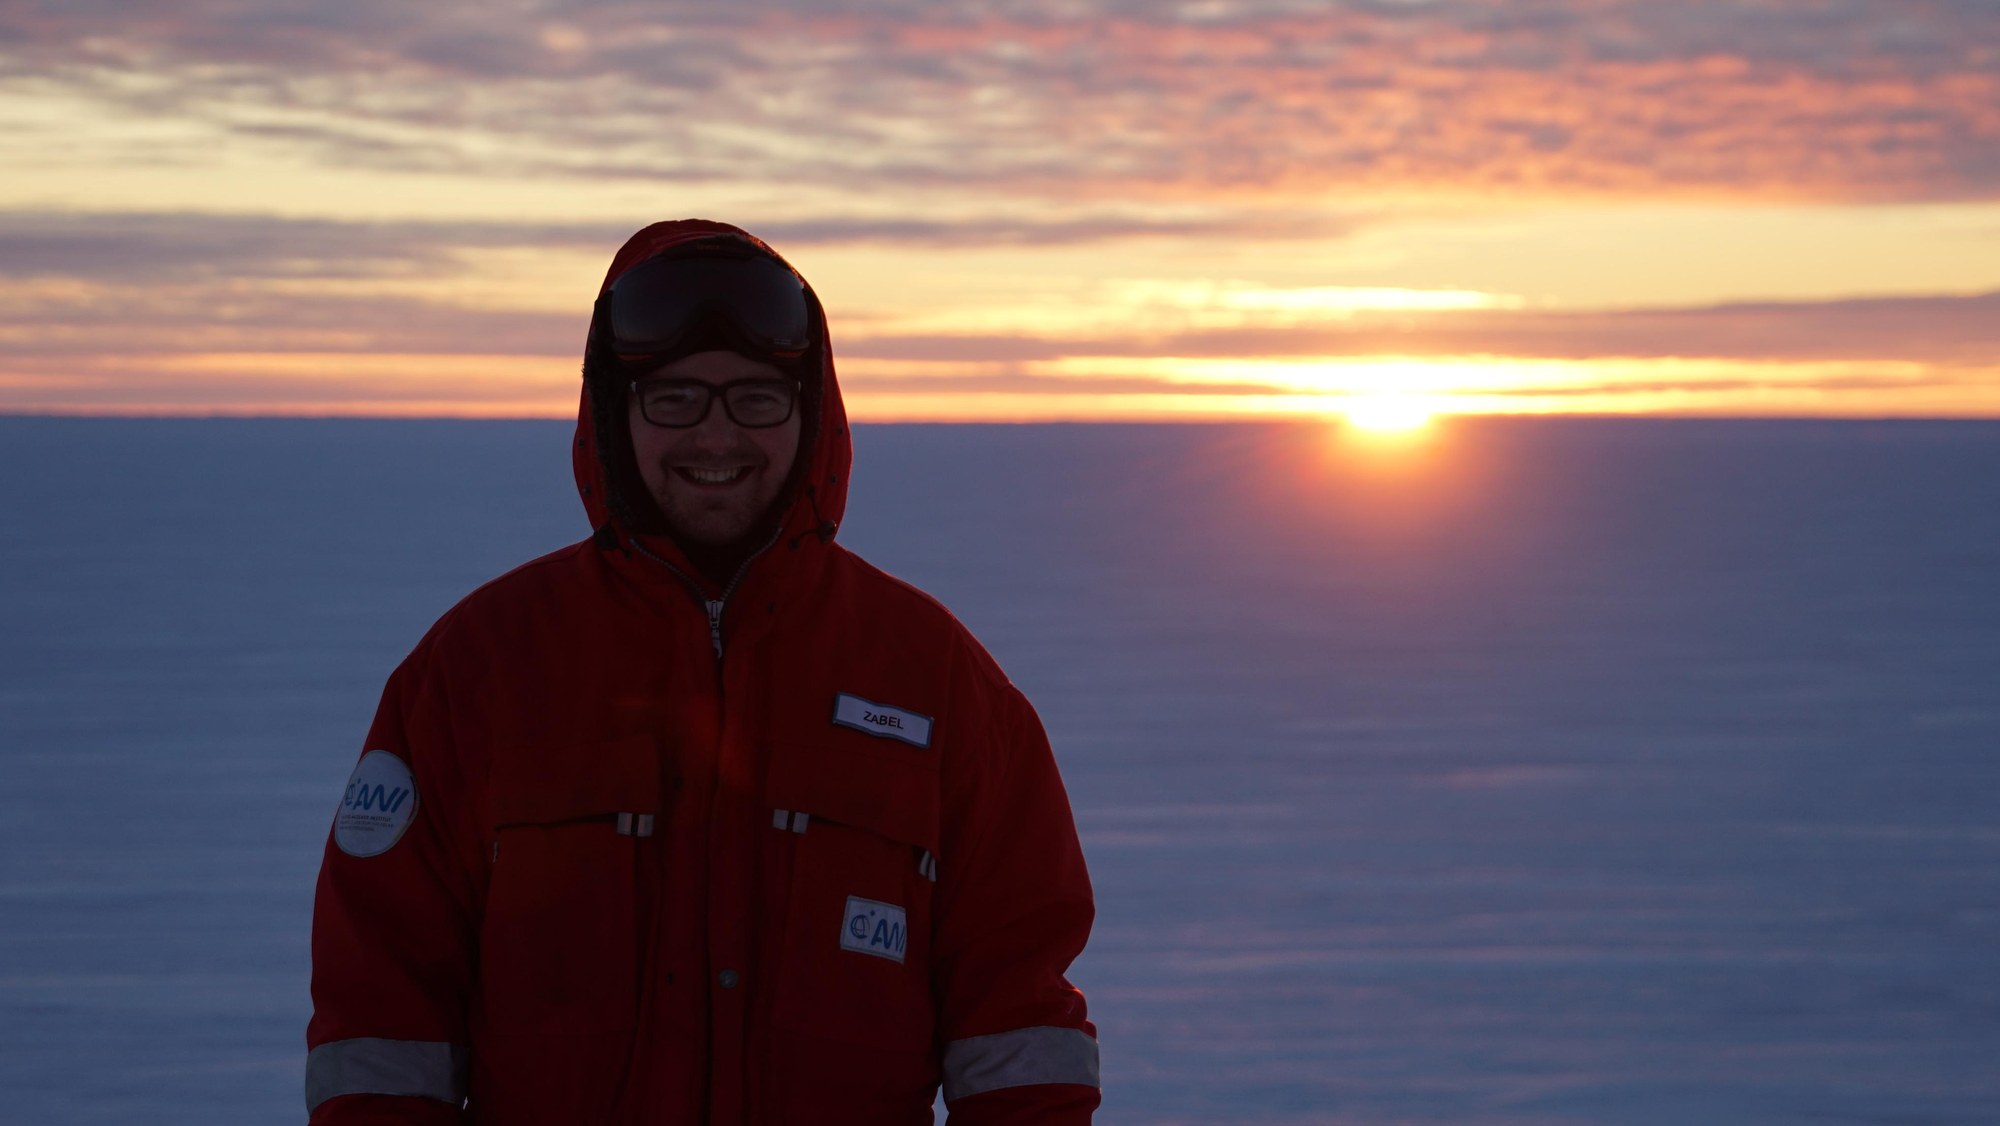 Paul Zabel watches the last sunset before the polar night